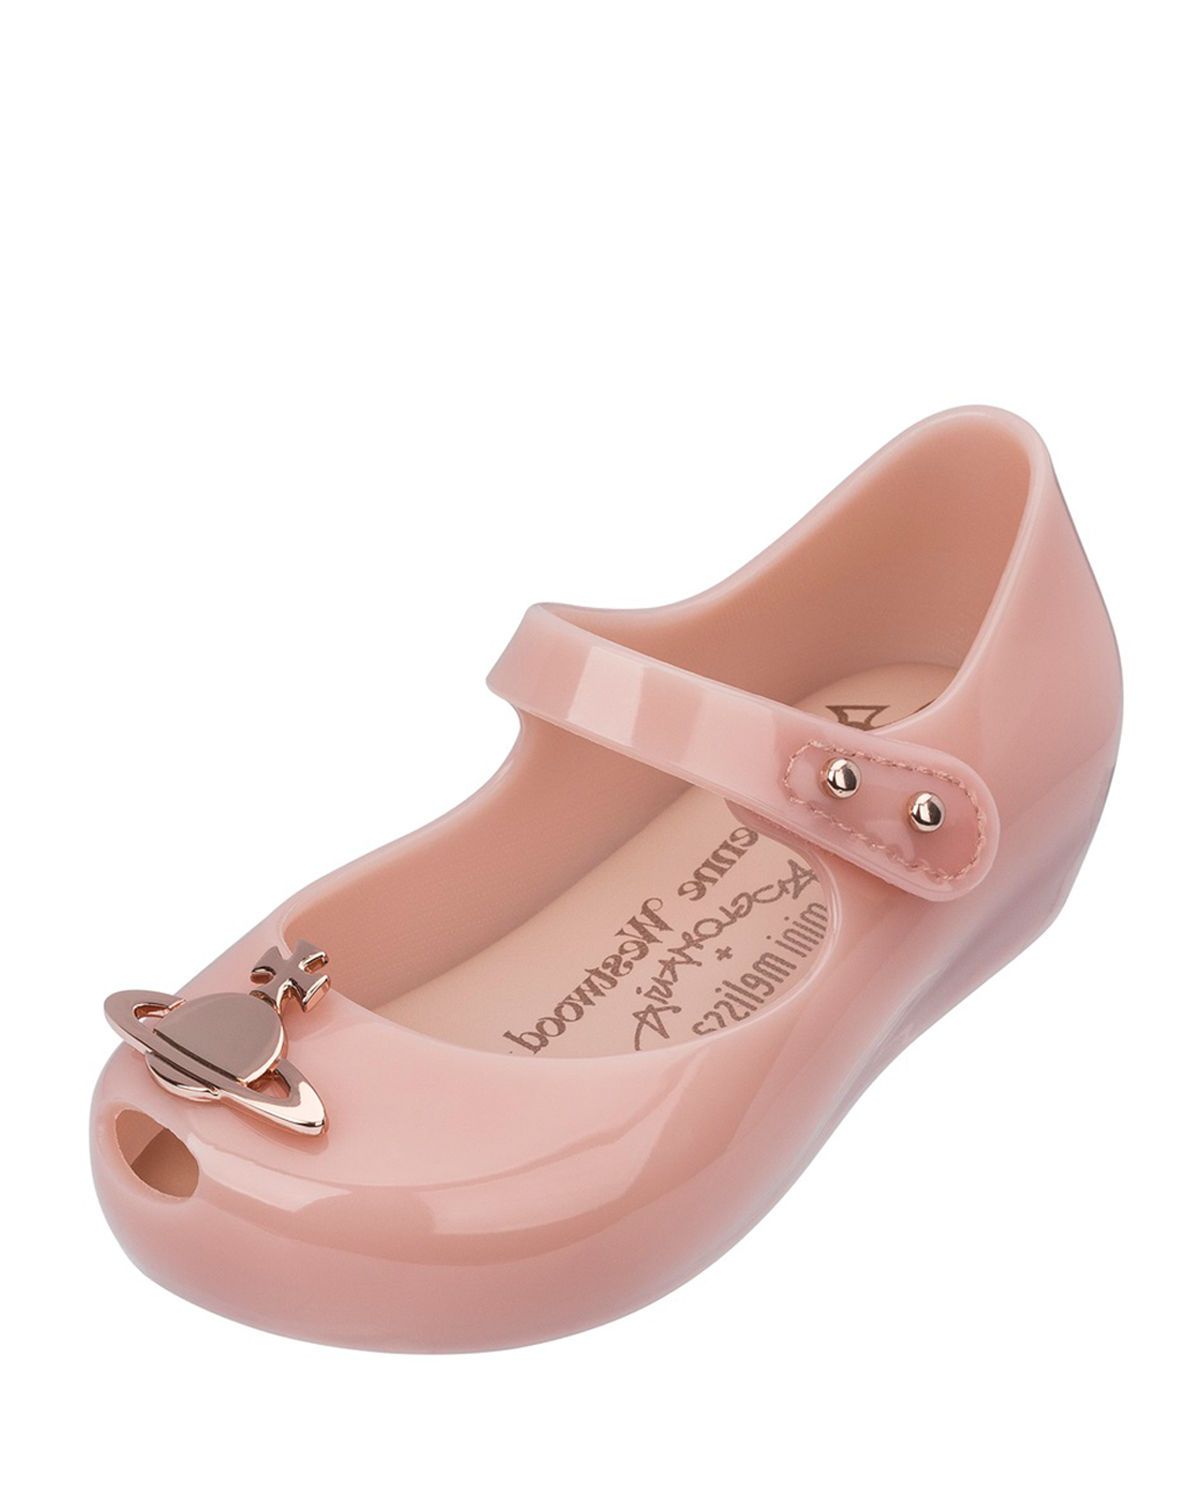 vivienne westwood mary jane shoes